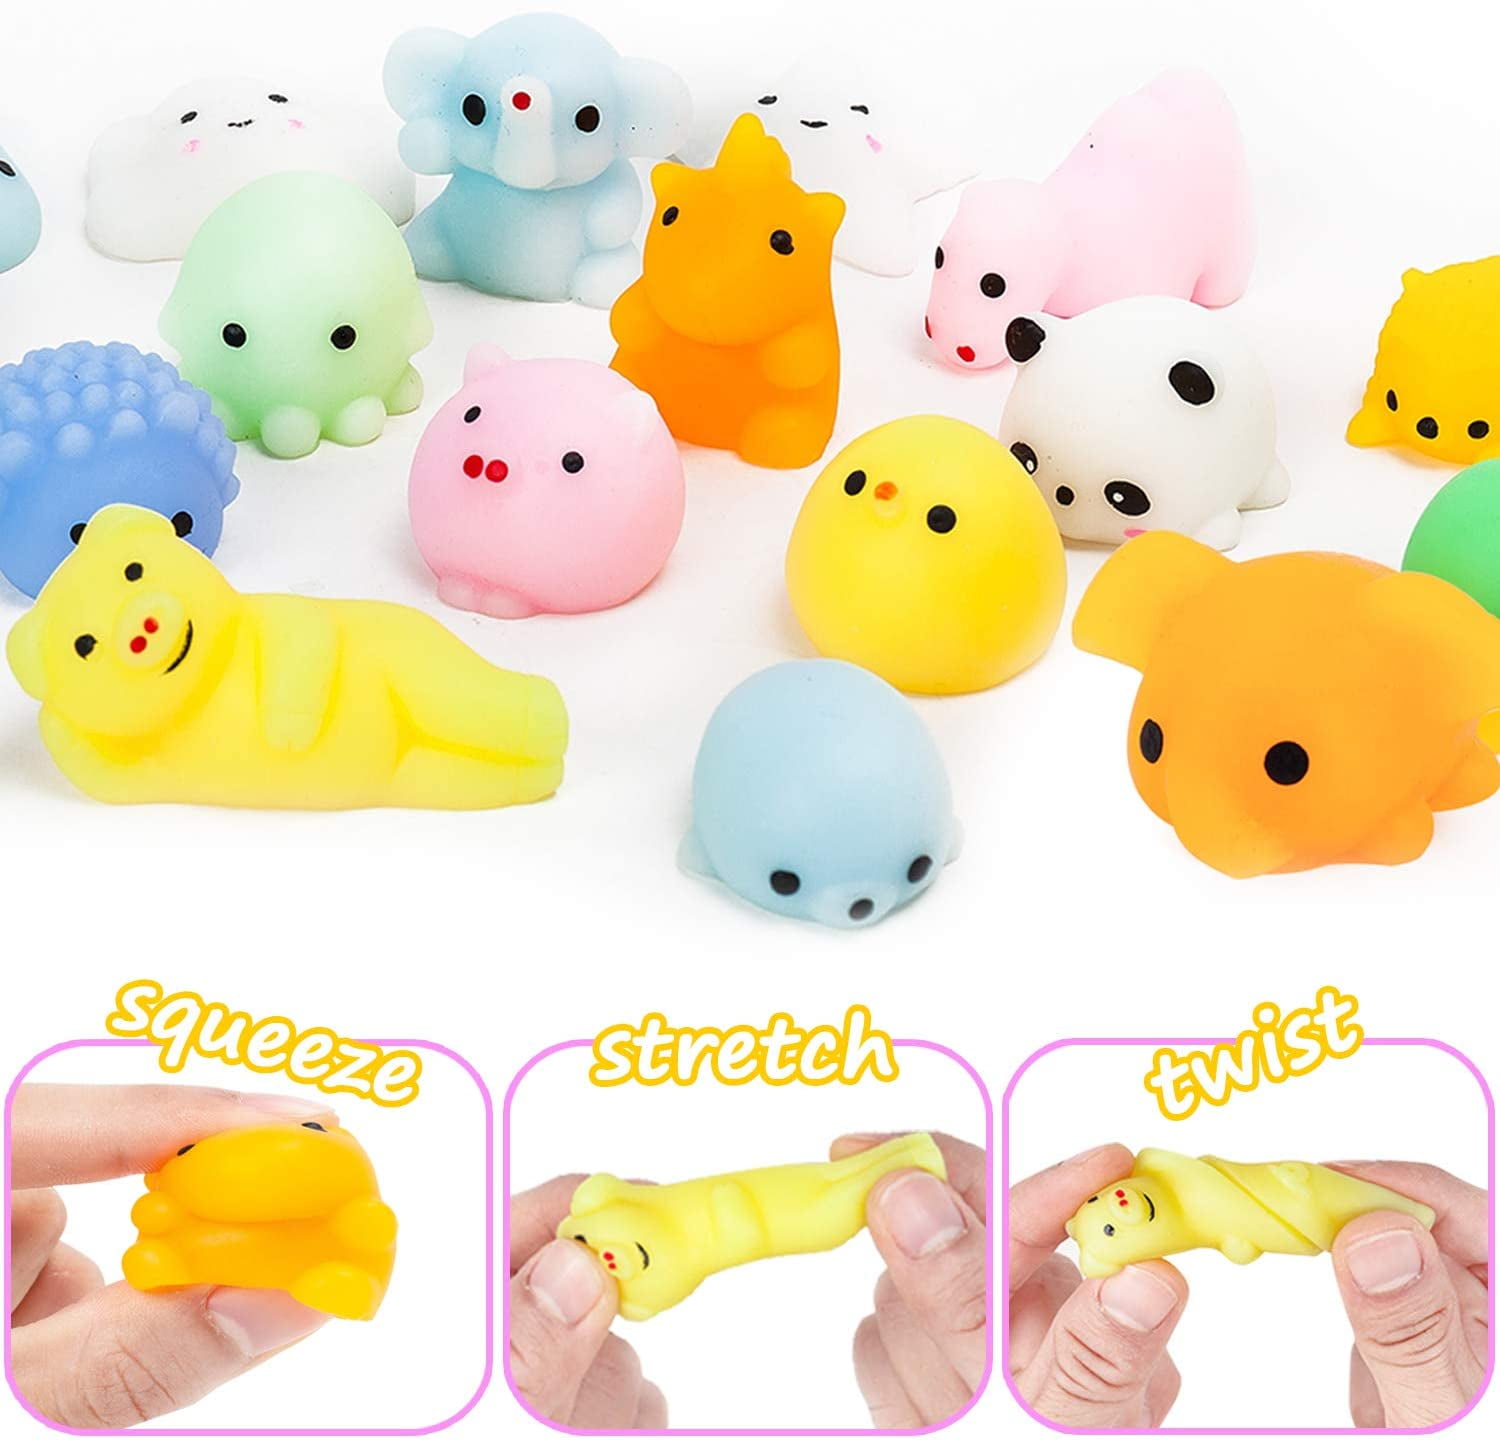 Mochi Squishy Squishy Toys Decompression Party Favors And Fidget Prizes For  Kids Novelty Gift For Adults Drop Delivery Available From Cocofyty, $0.33